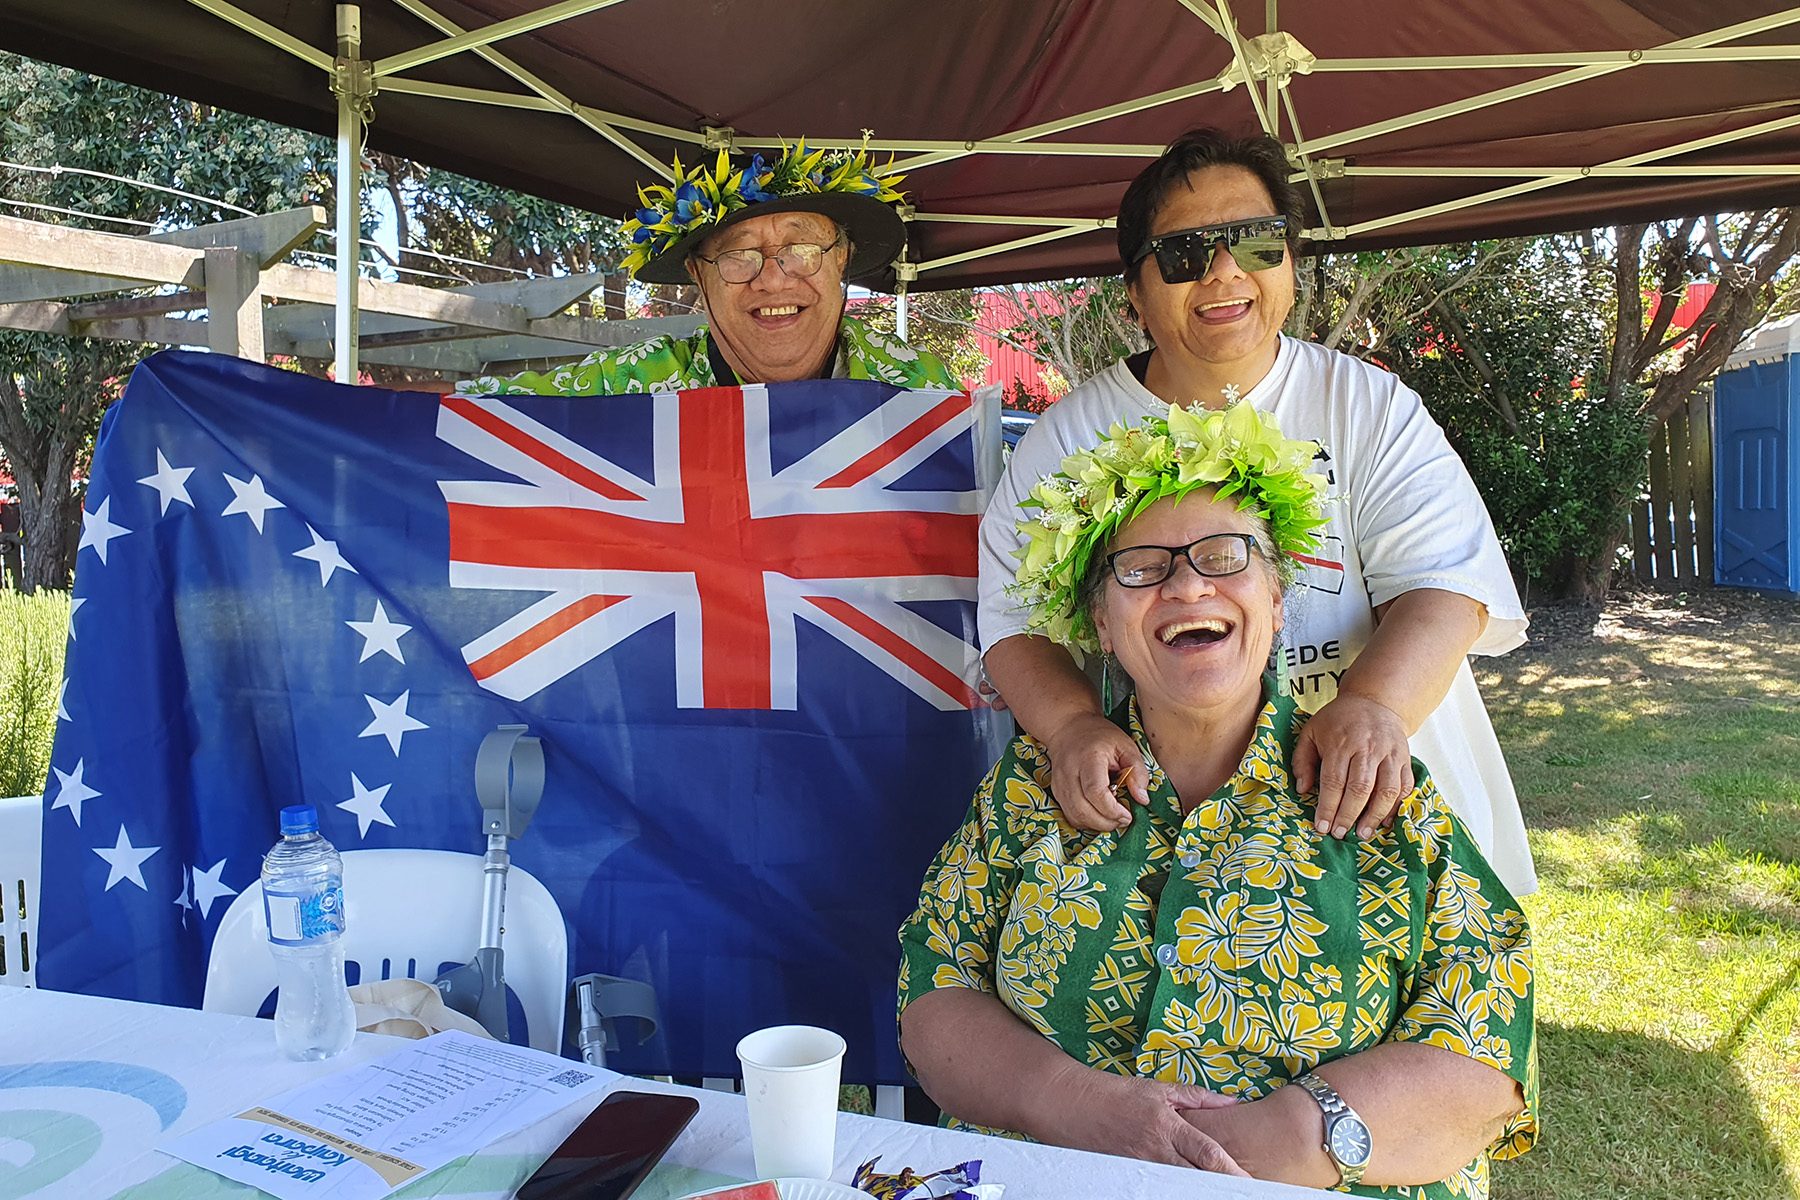 Three people behind a table with one holding up a flag while under a tent.